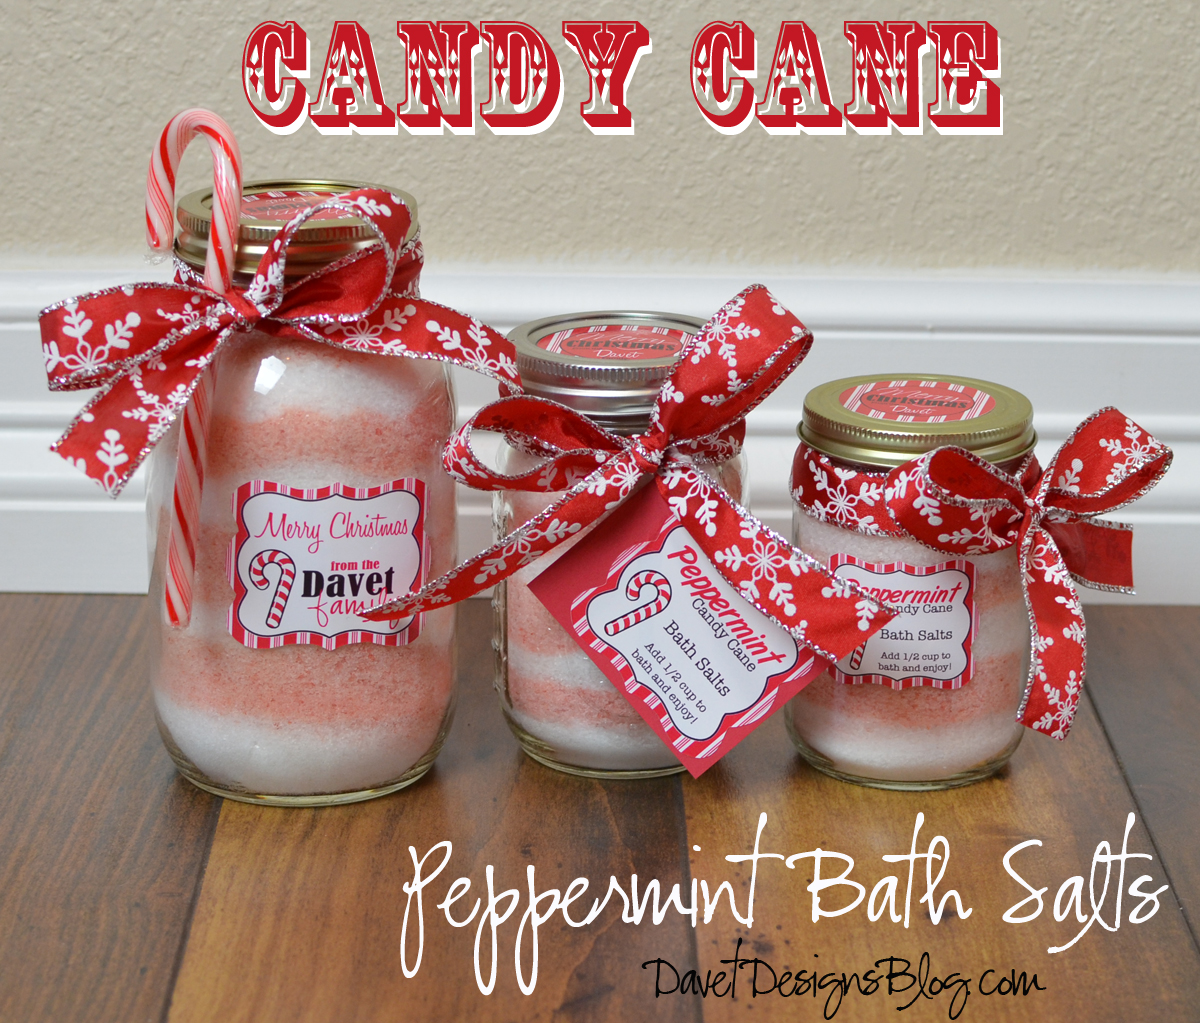  Bath Salts. These bath salts smell amazing when added to your bath title=